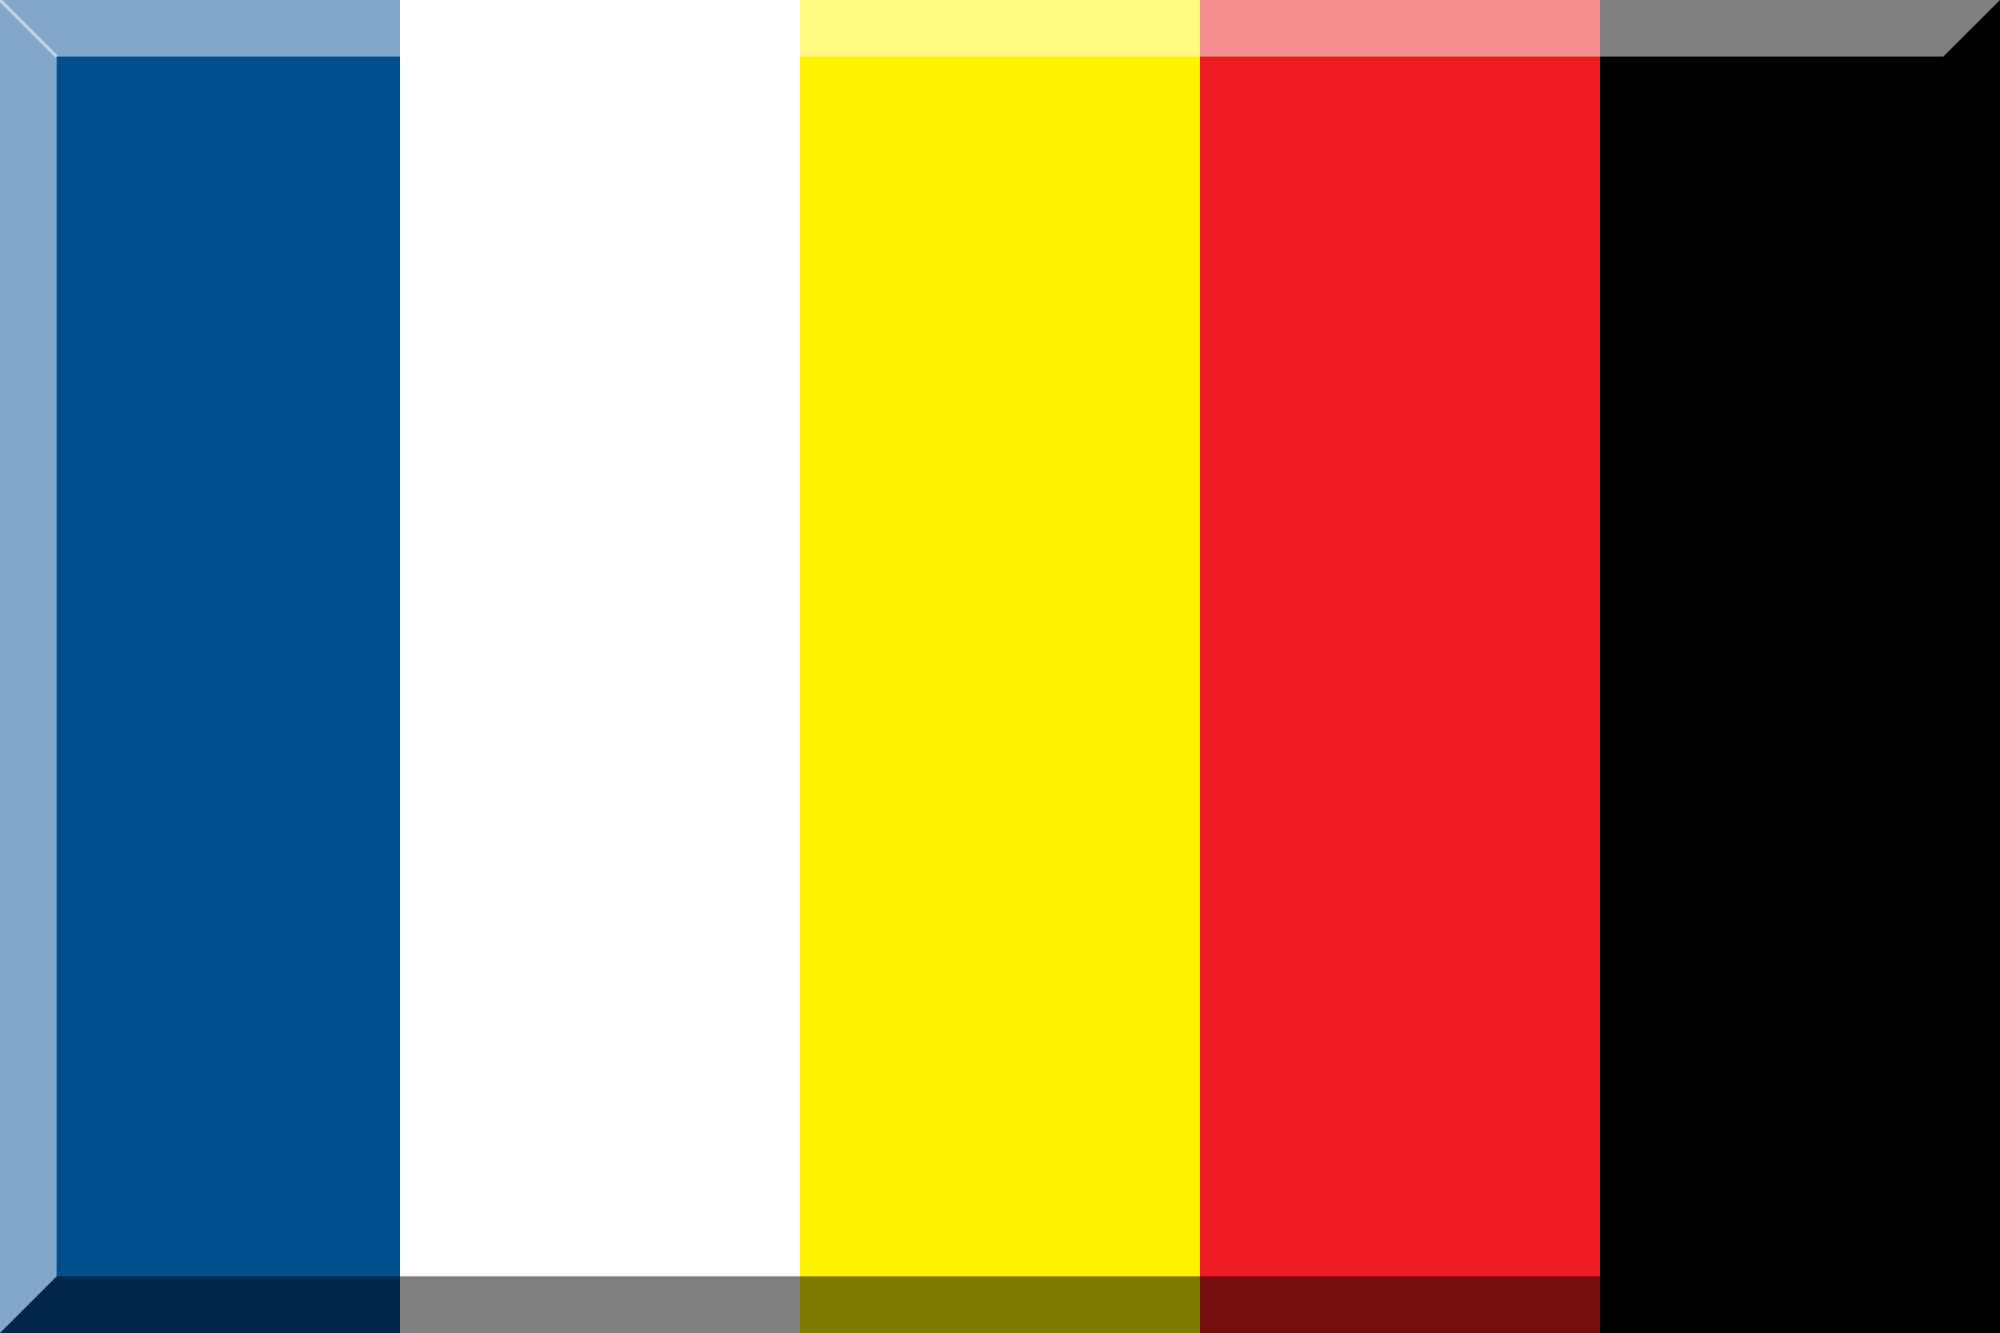 Red Black and Blue Logo - File:Flag-Blue-White-Yellow-Red-Black.svg - Wikimedia Commons